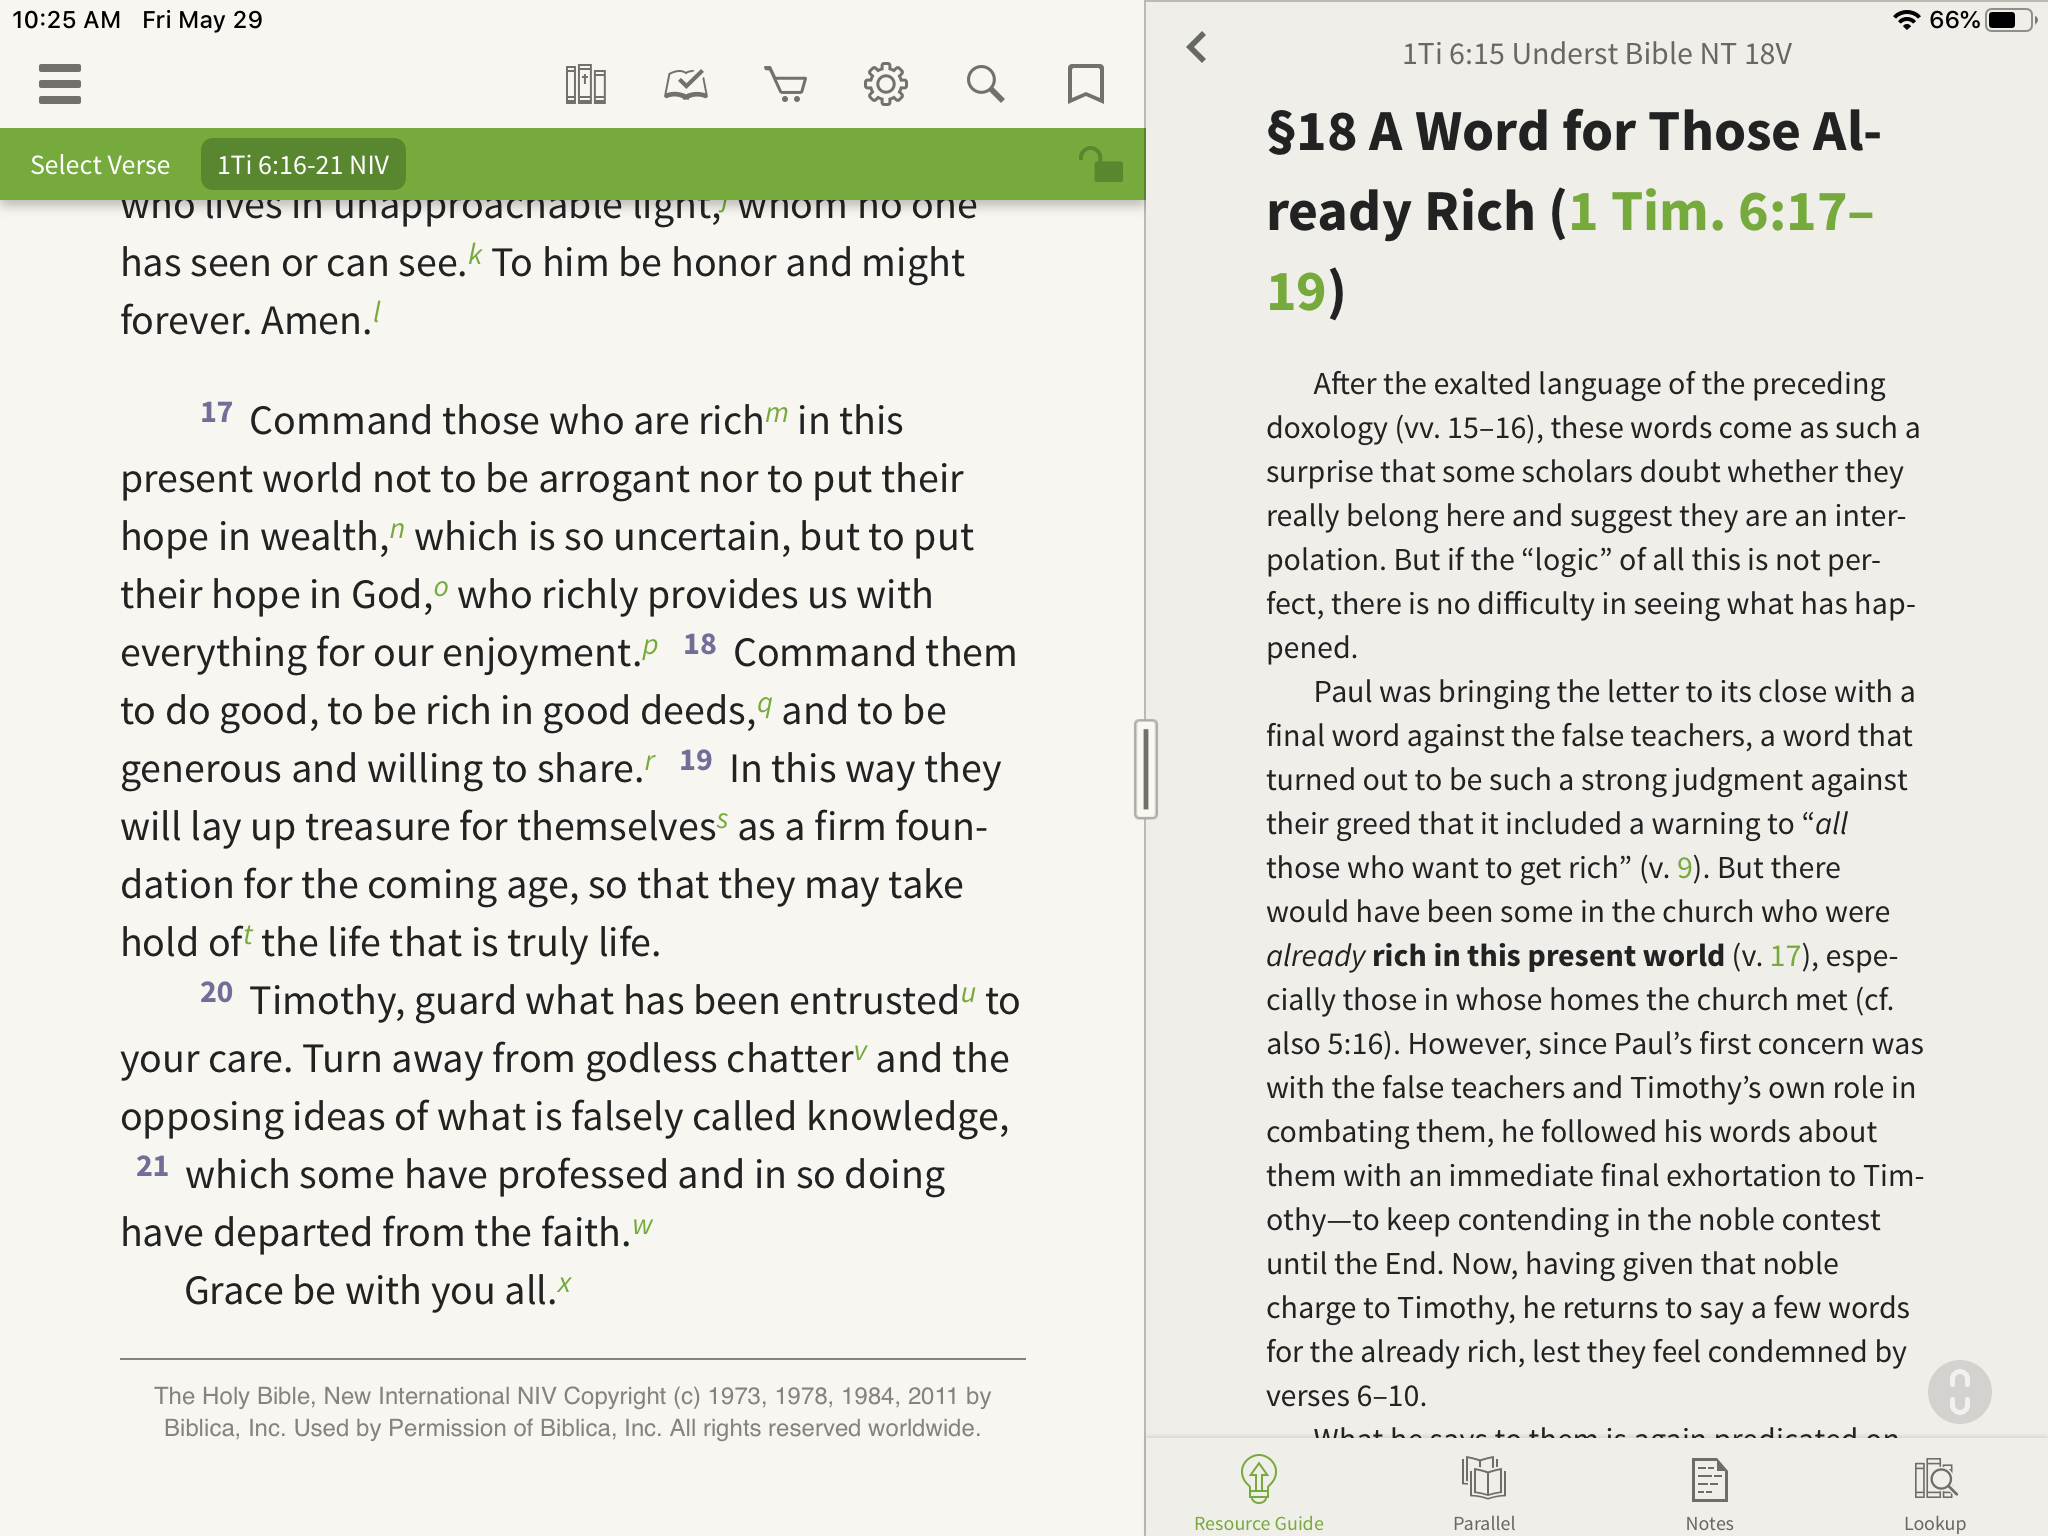 Understanding the Bible Commentary discussing money in the Bible